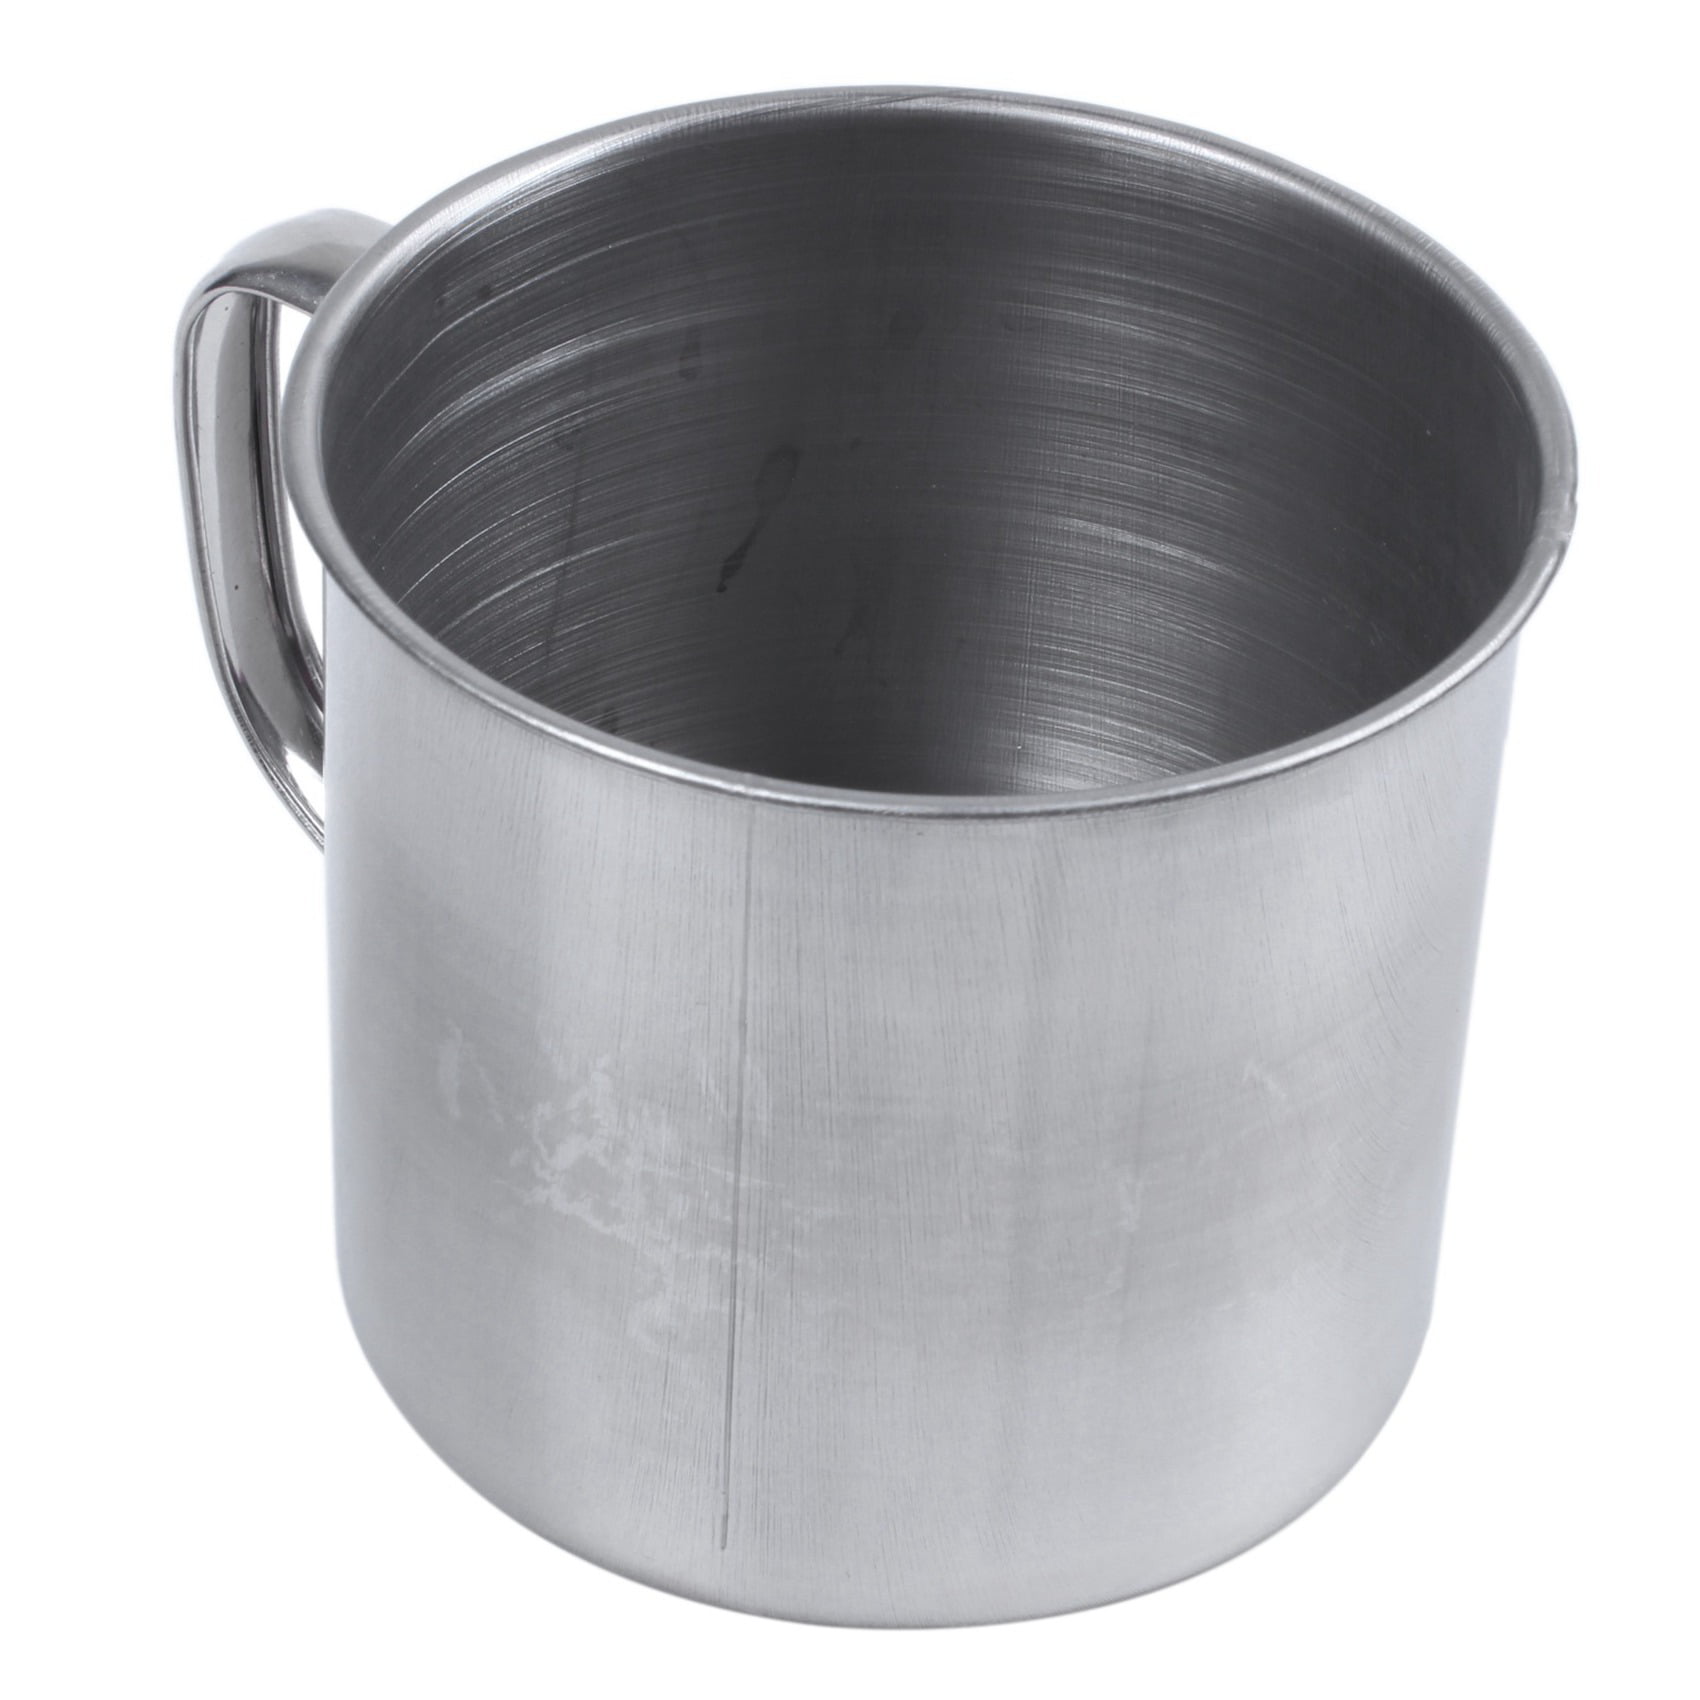 Stainless Steel Coffee Tea Mug Cup-Camping/Travel 3.5 MOUS 